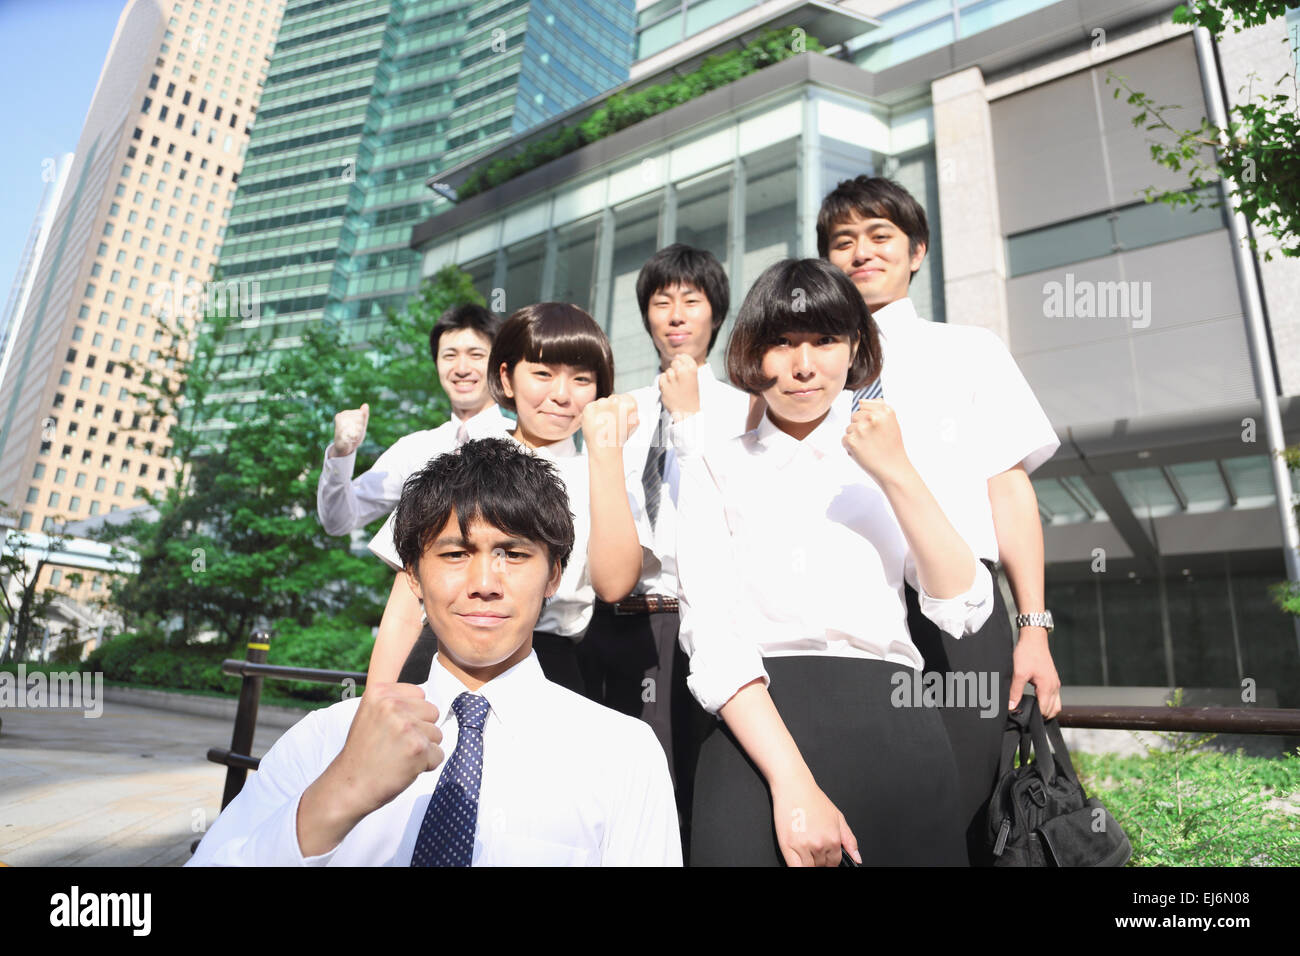 Young Japanese business people Stock Photo